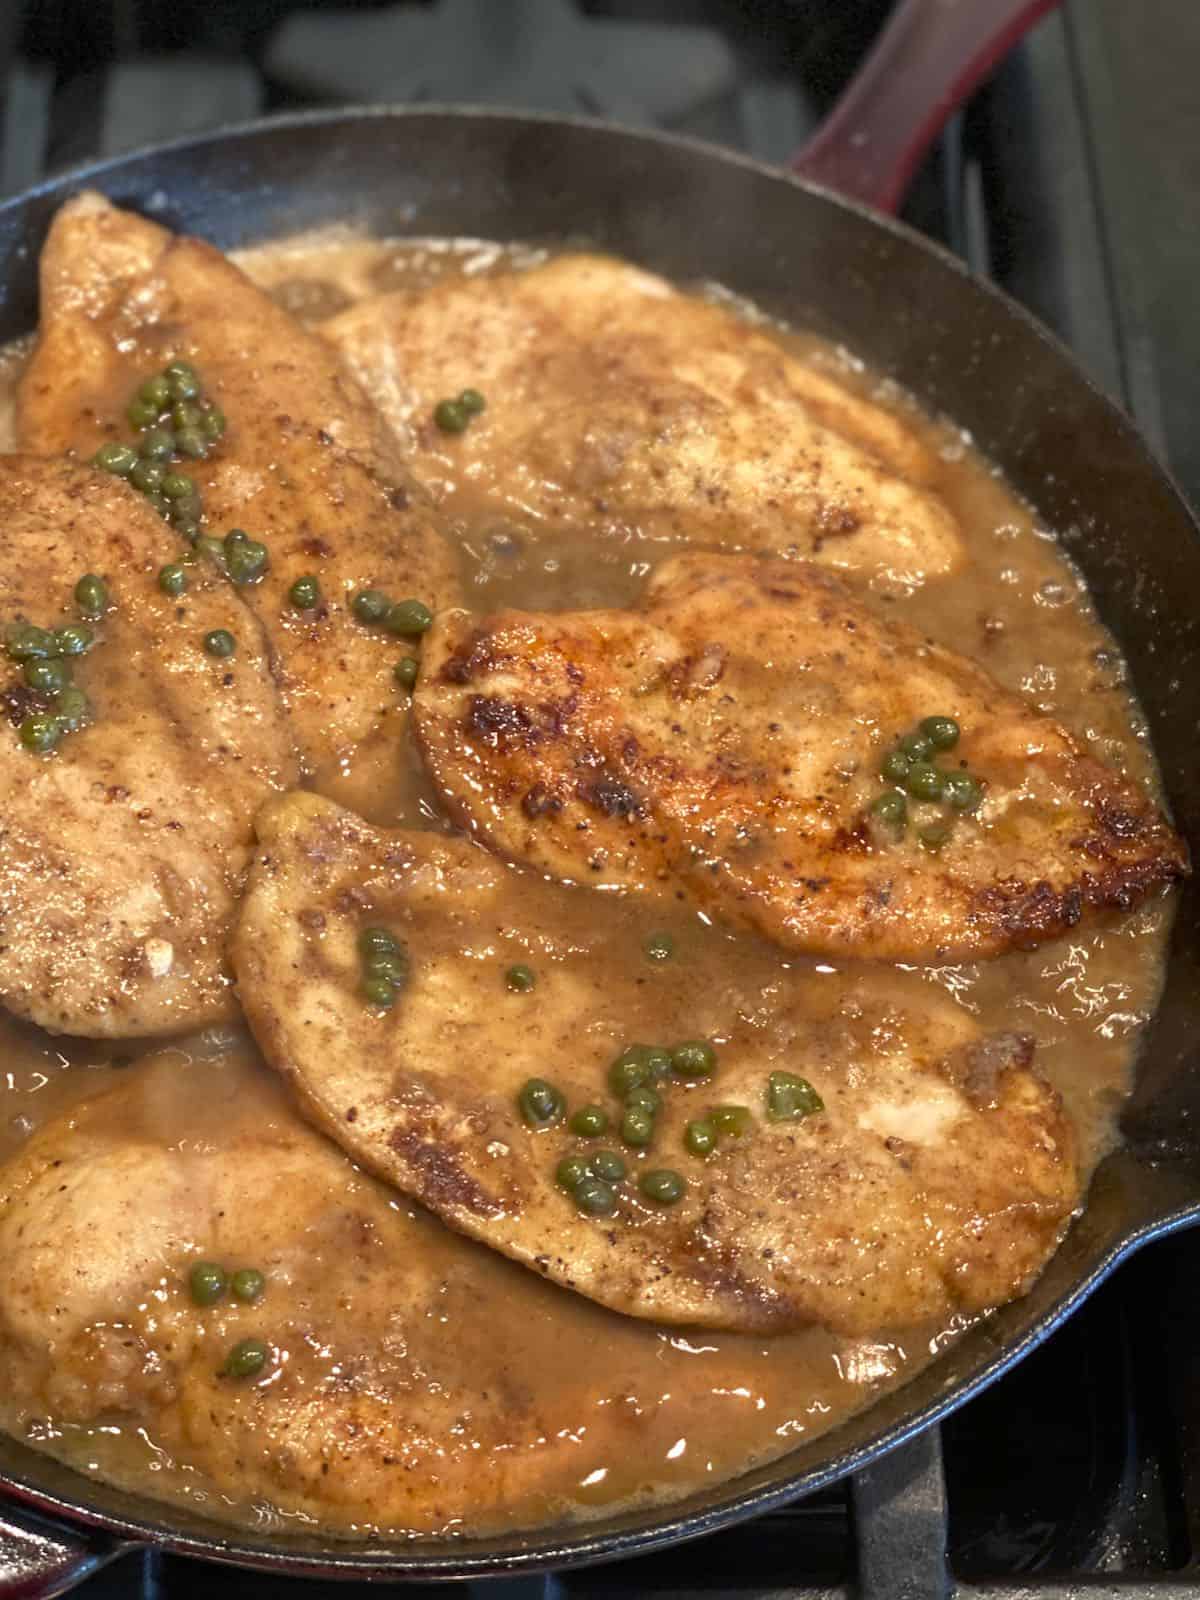 Lemon chicken piccata simmering it sauce on the stove top.